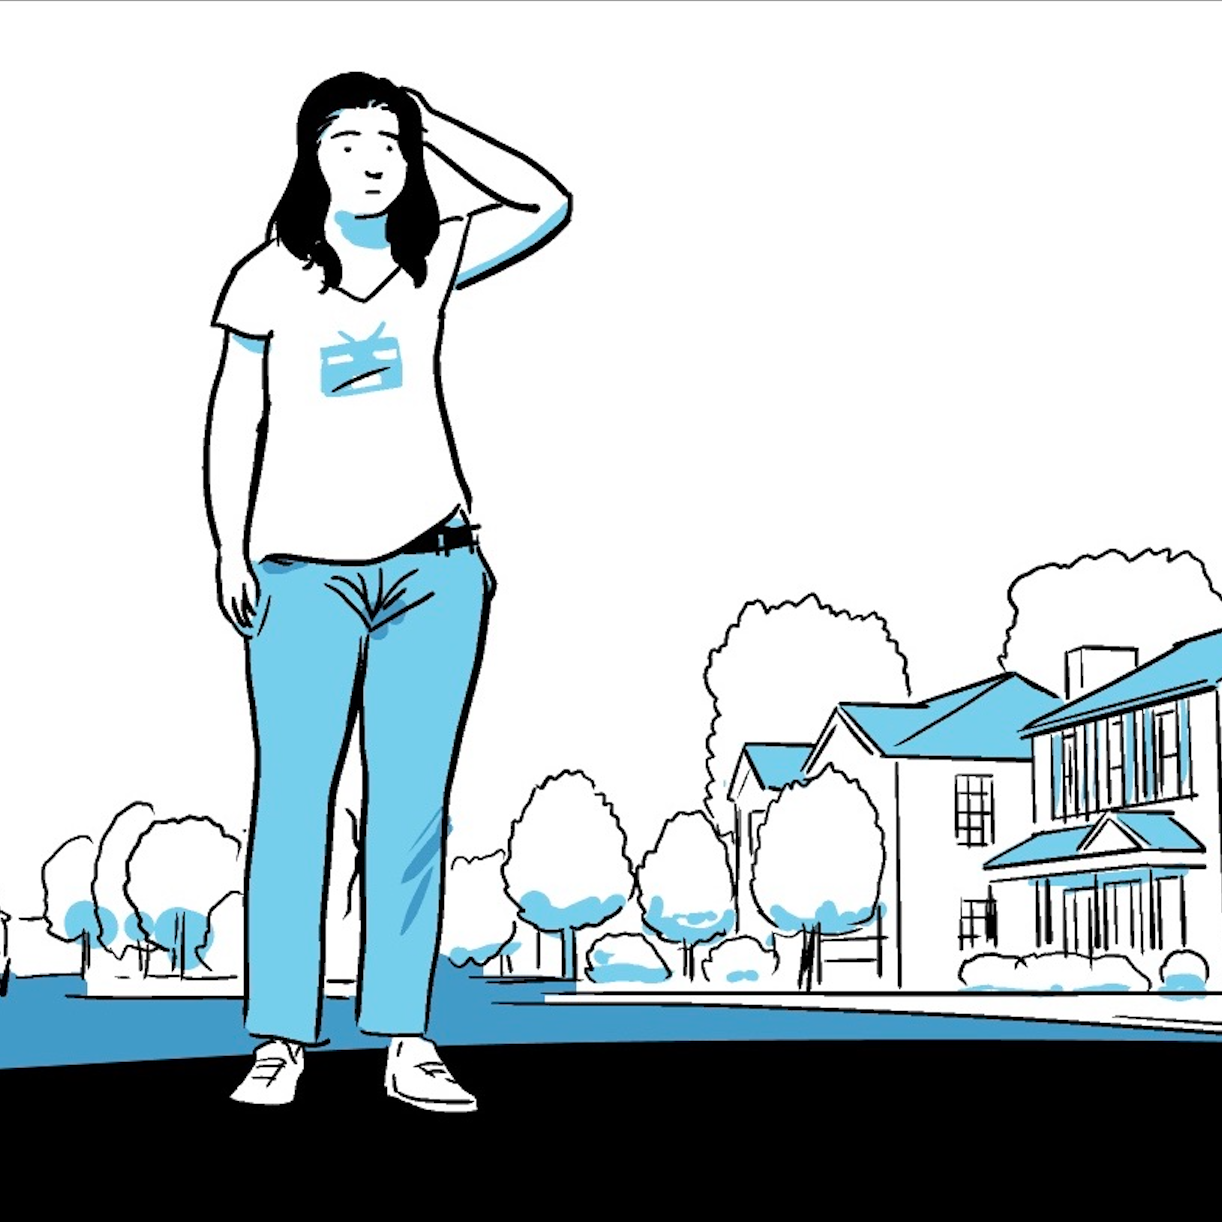 And illustration of a teenage girl, wearing a T-shirt in jeans, standing in the middle of a suburban street